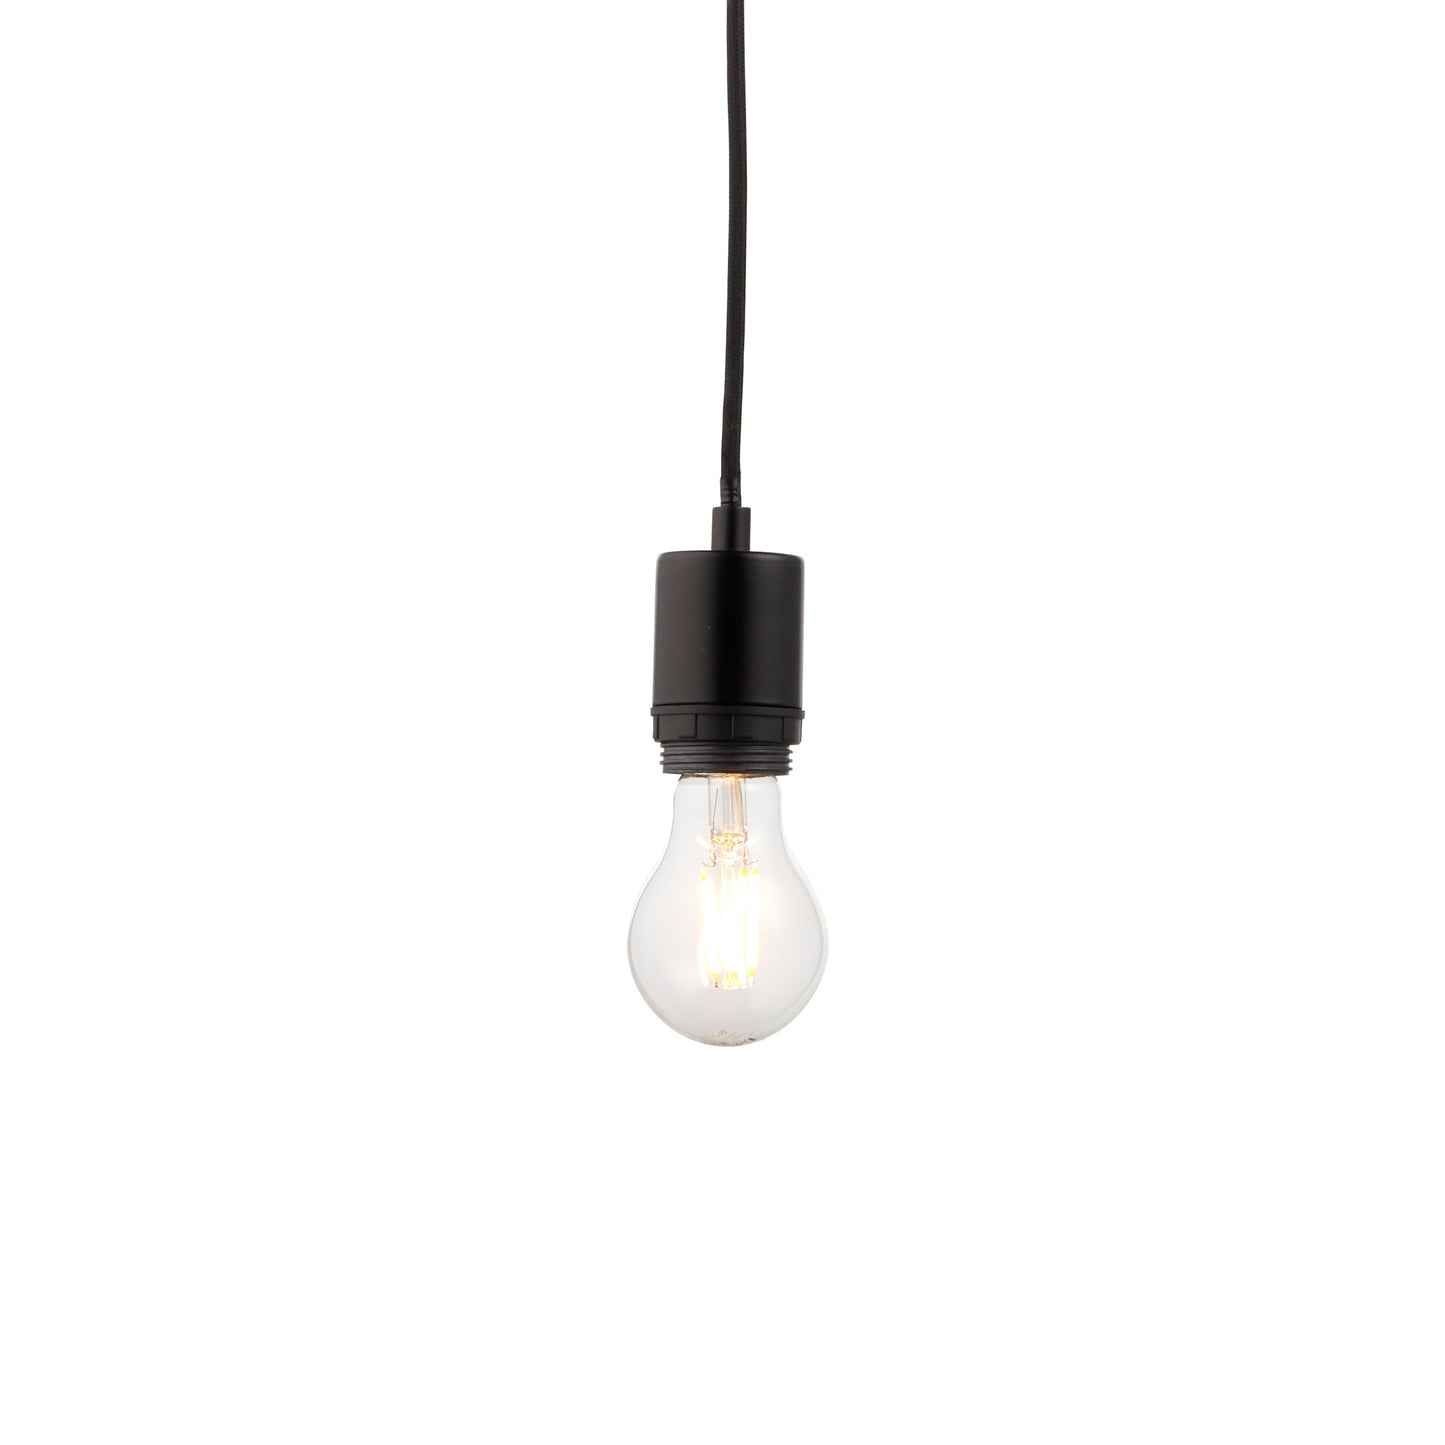 A Studio Pendant Light Black hanging on a white background, perfect for interior decor.